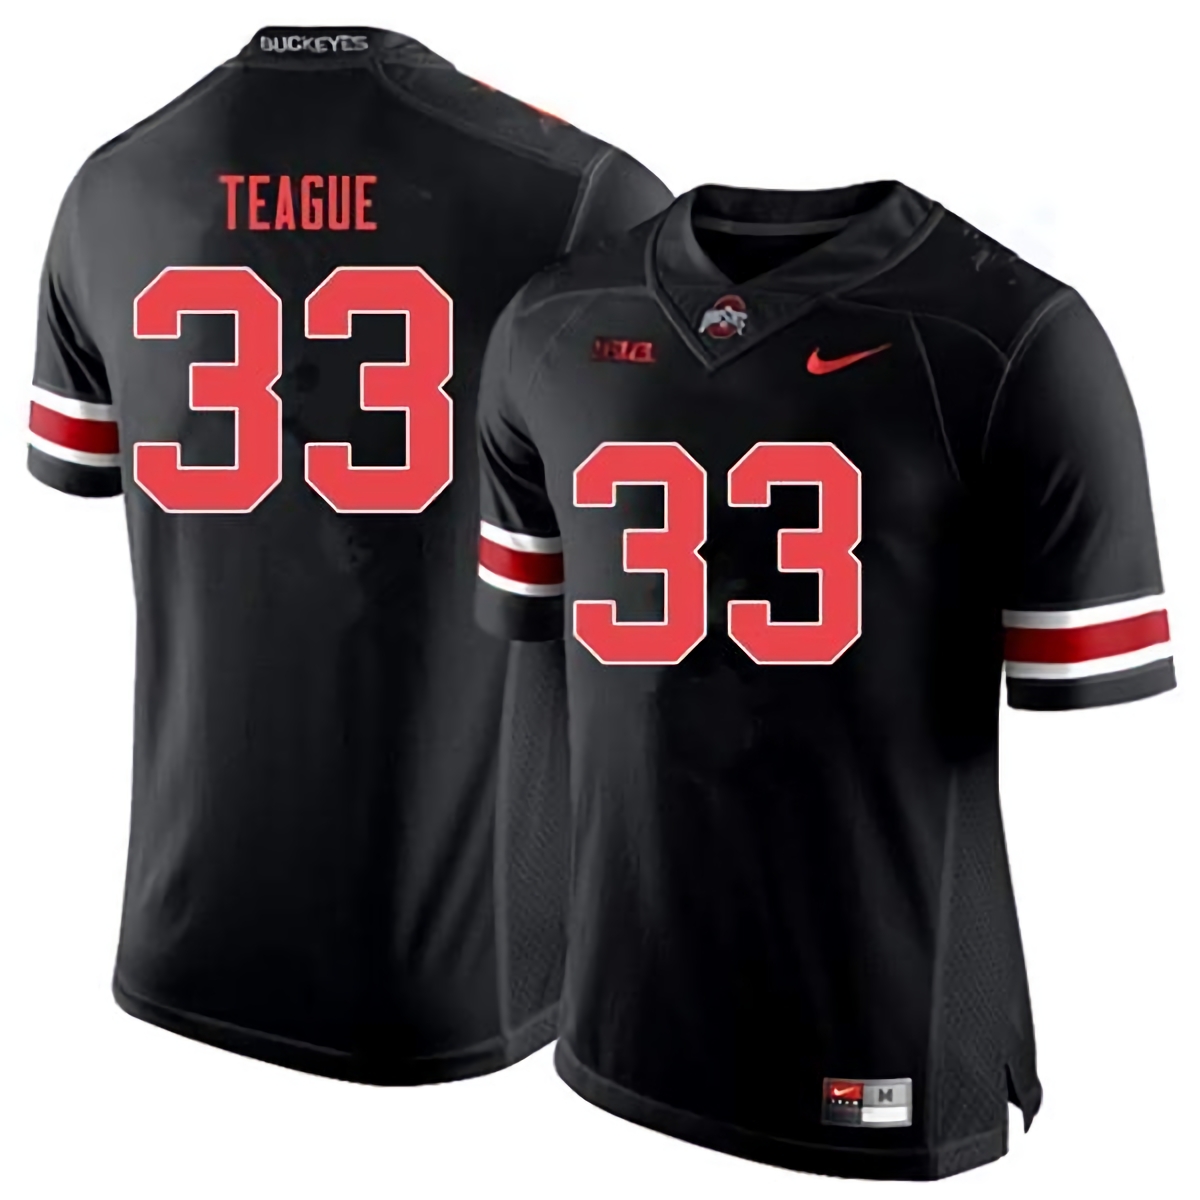 Master Teague Ohio State Buckeyes Men's NCAA #33 Nike Black Out College Stitched Football Jersey RXI5456ZU